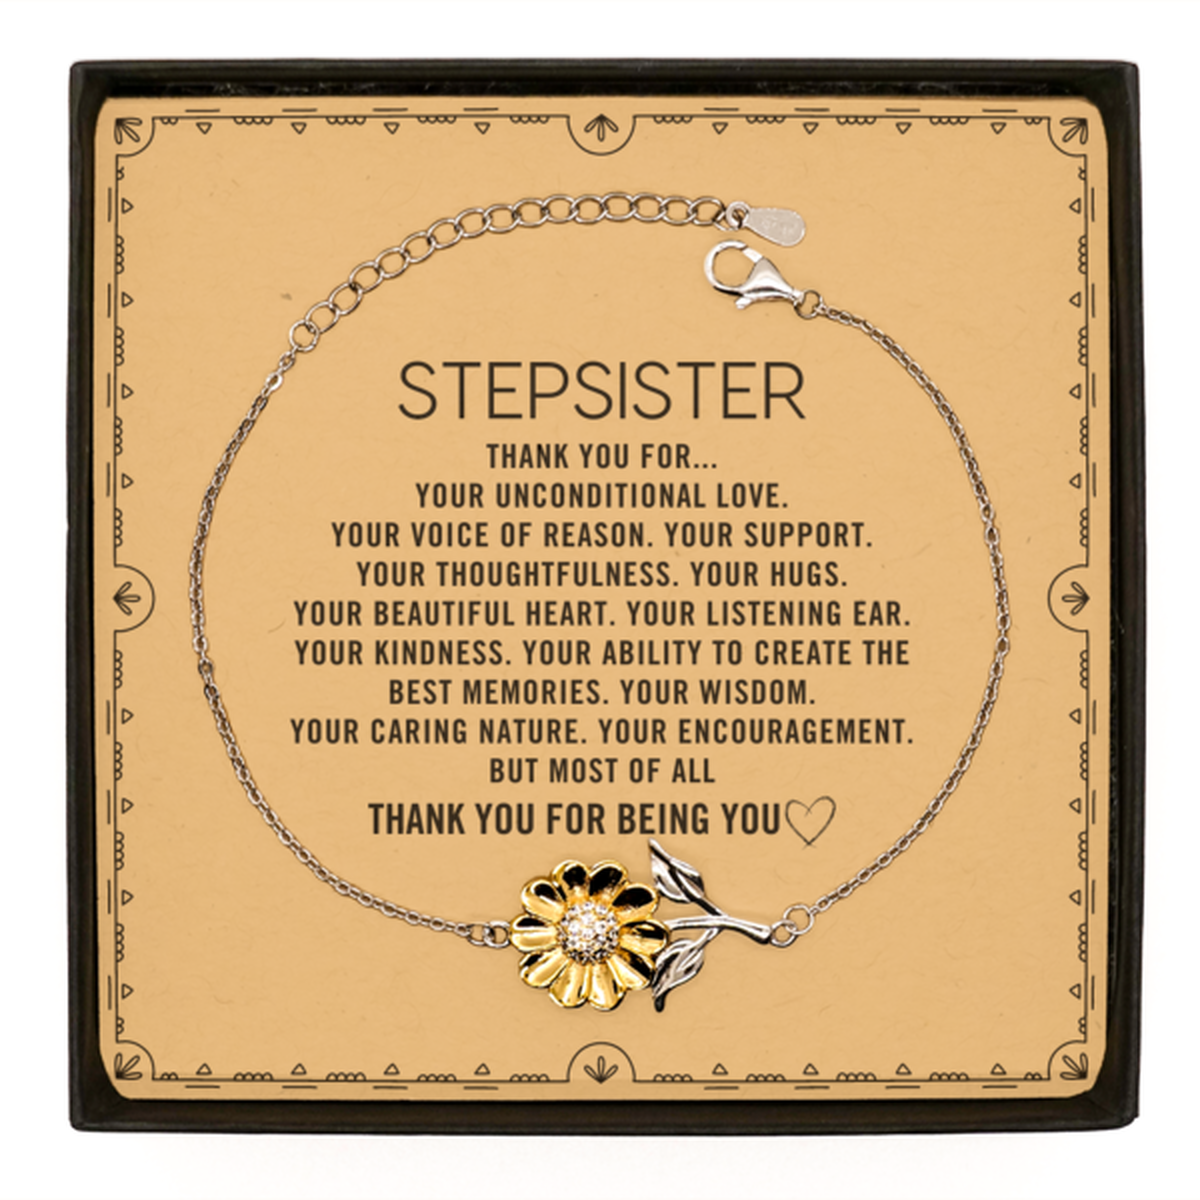 Stepsister Sunflower Bracelet Custom, Message Card Gifts For Stepsister Christmas Graduation Birthday Gifts for Men Women Stepsister Thank you for Your unconditional love